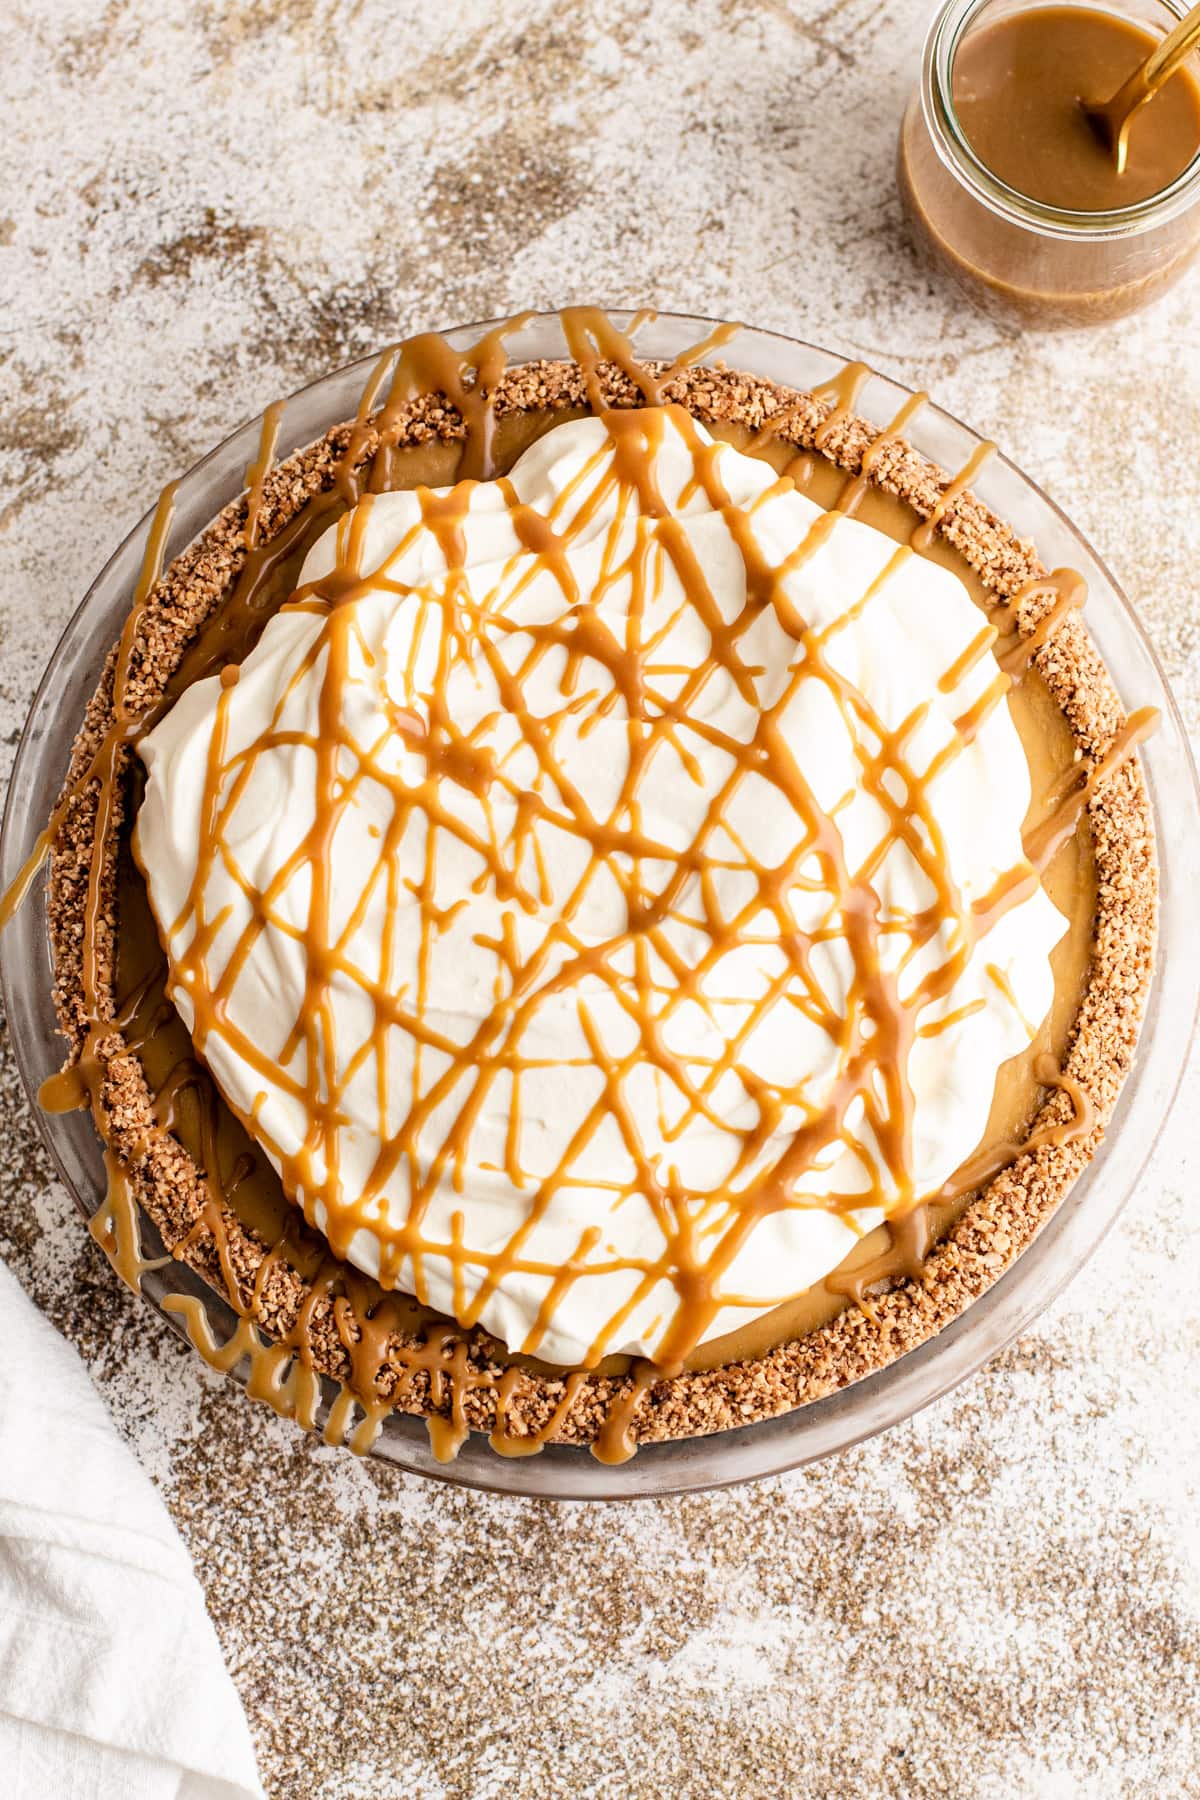 Butterscotch cream pie with drizzled butterscotch over the top.